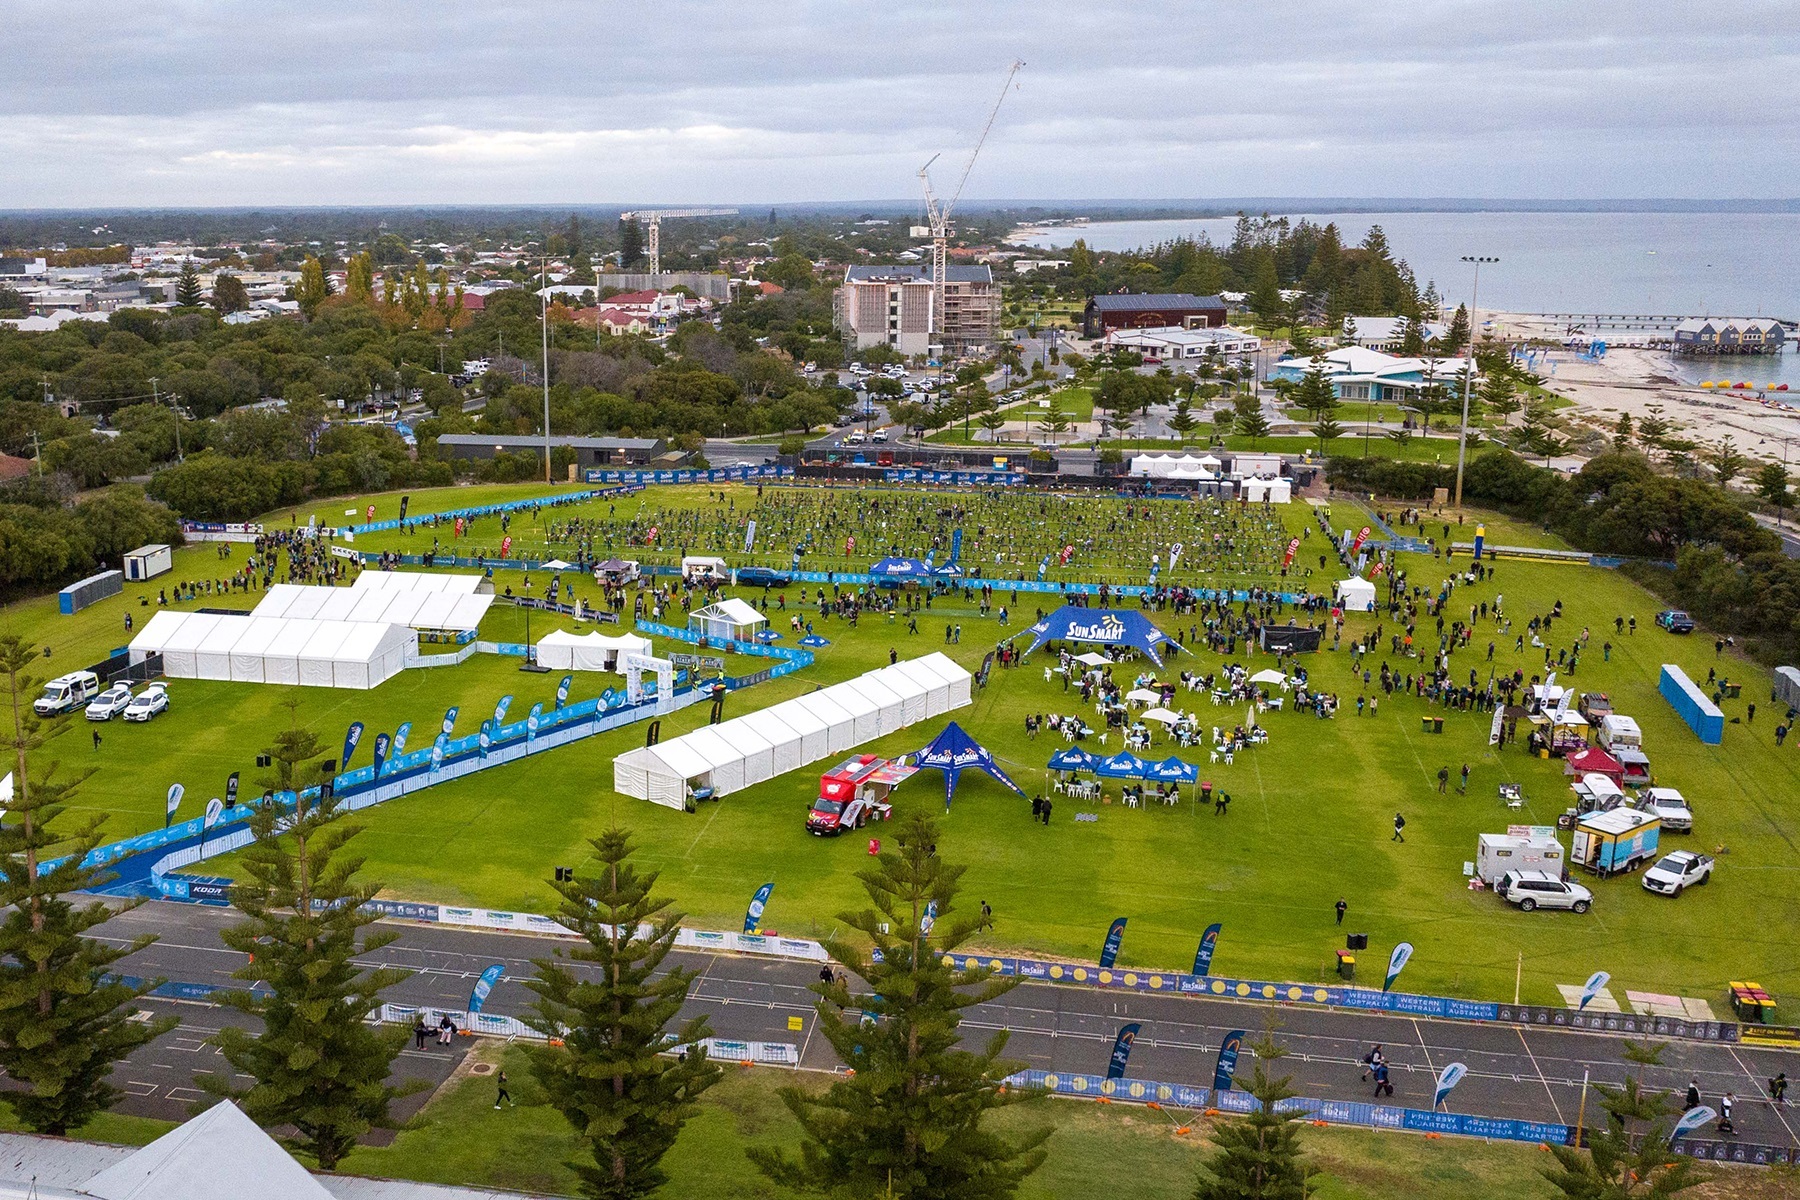 Ariel photo of a triathlon event in the City of Busselton.